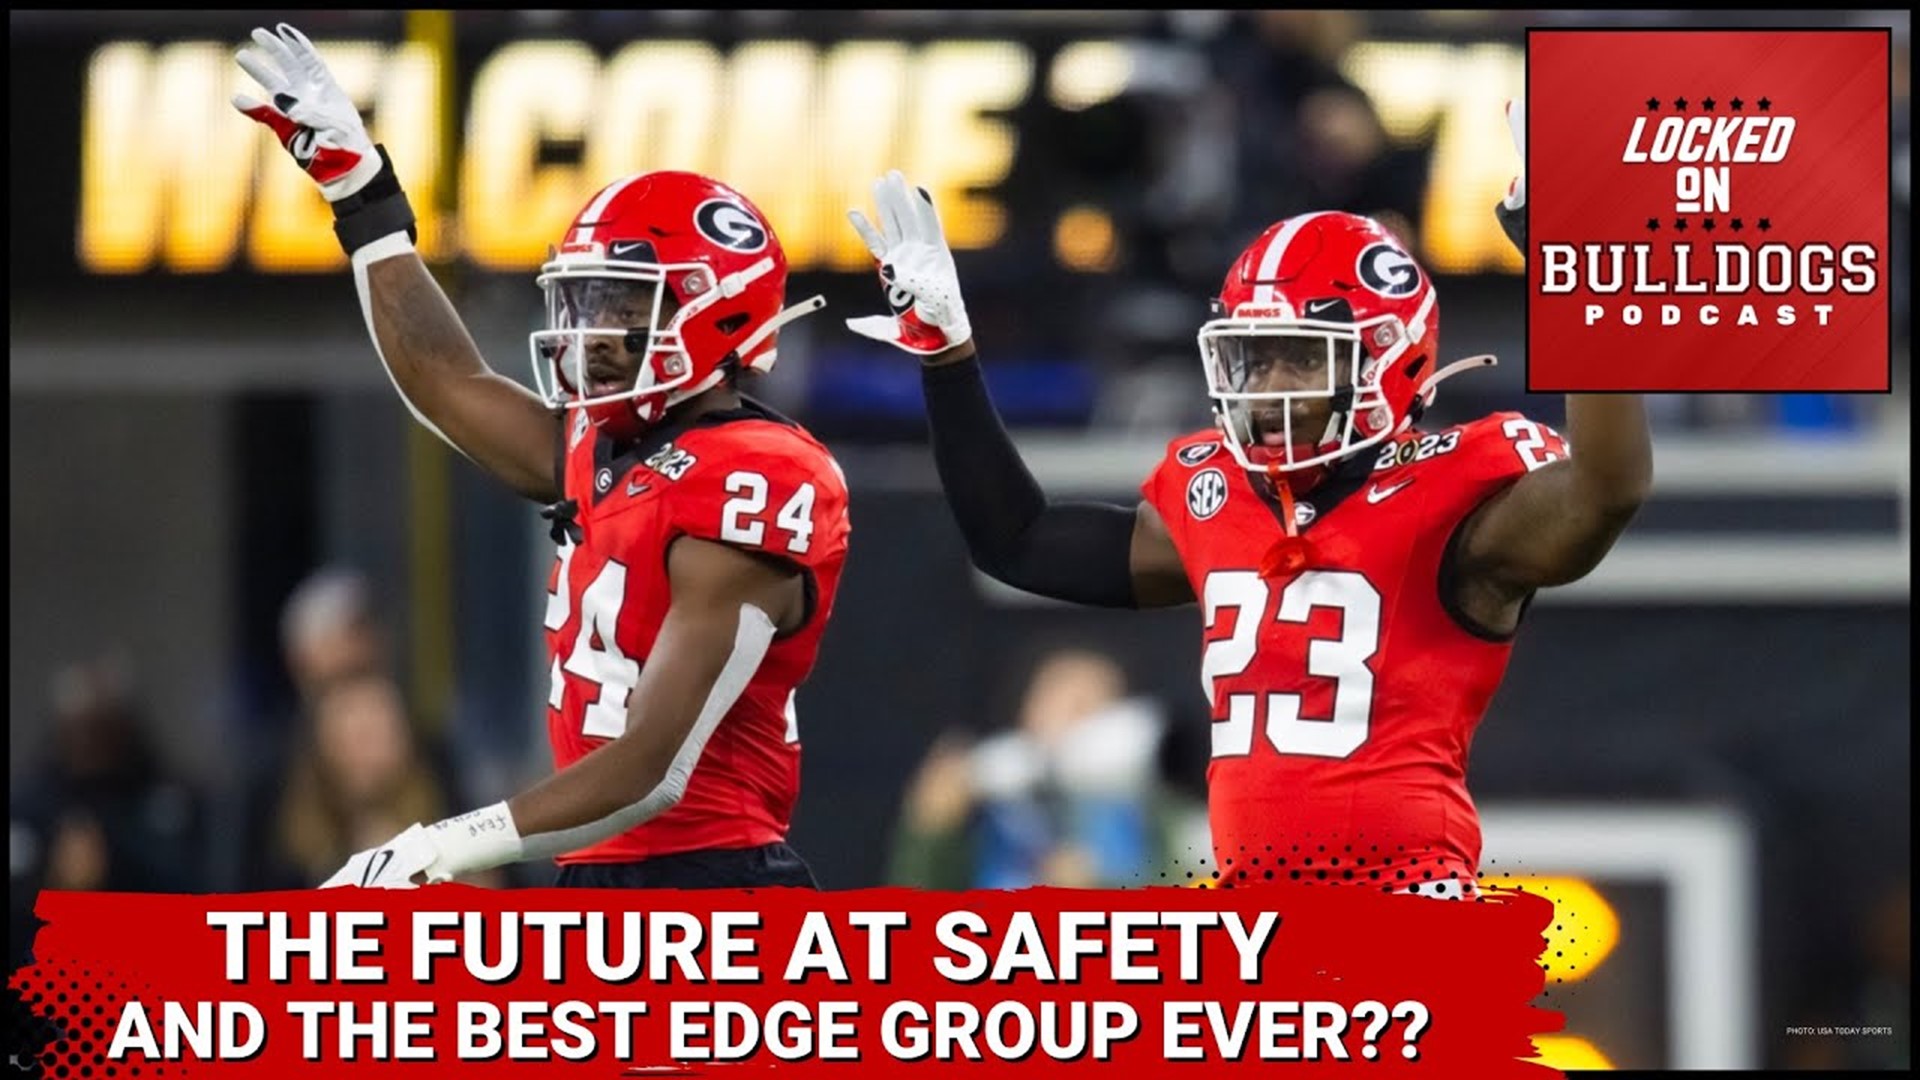 Spring Practice. UGA’s pass rush EVER. Plus new analysts and an empty safety spot